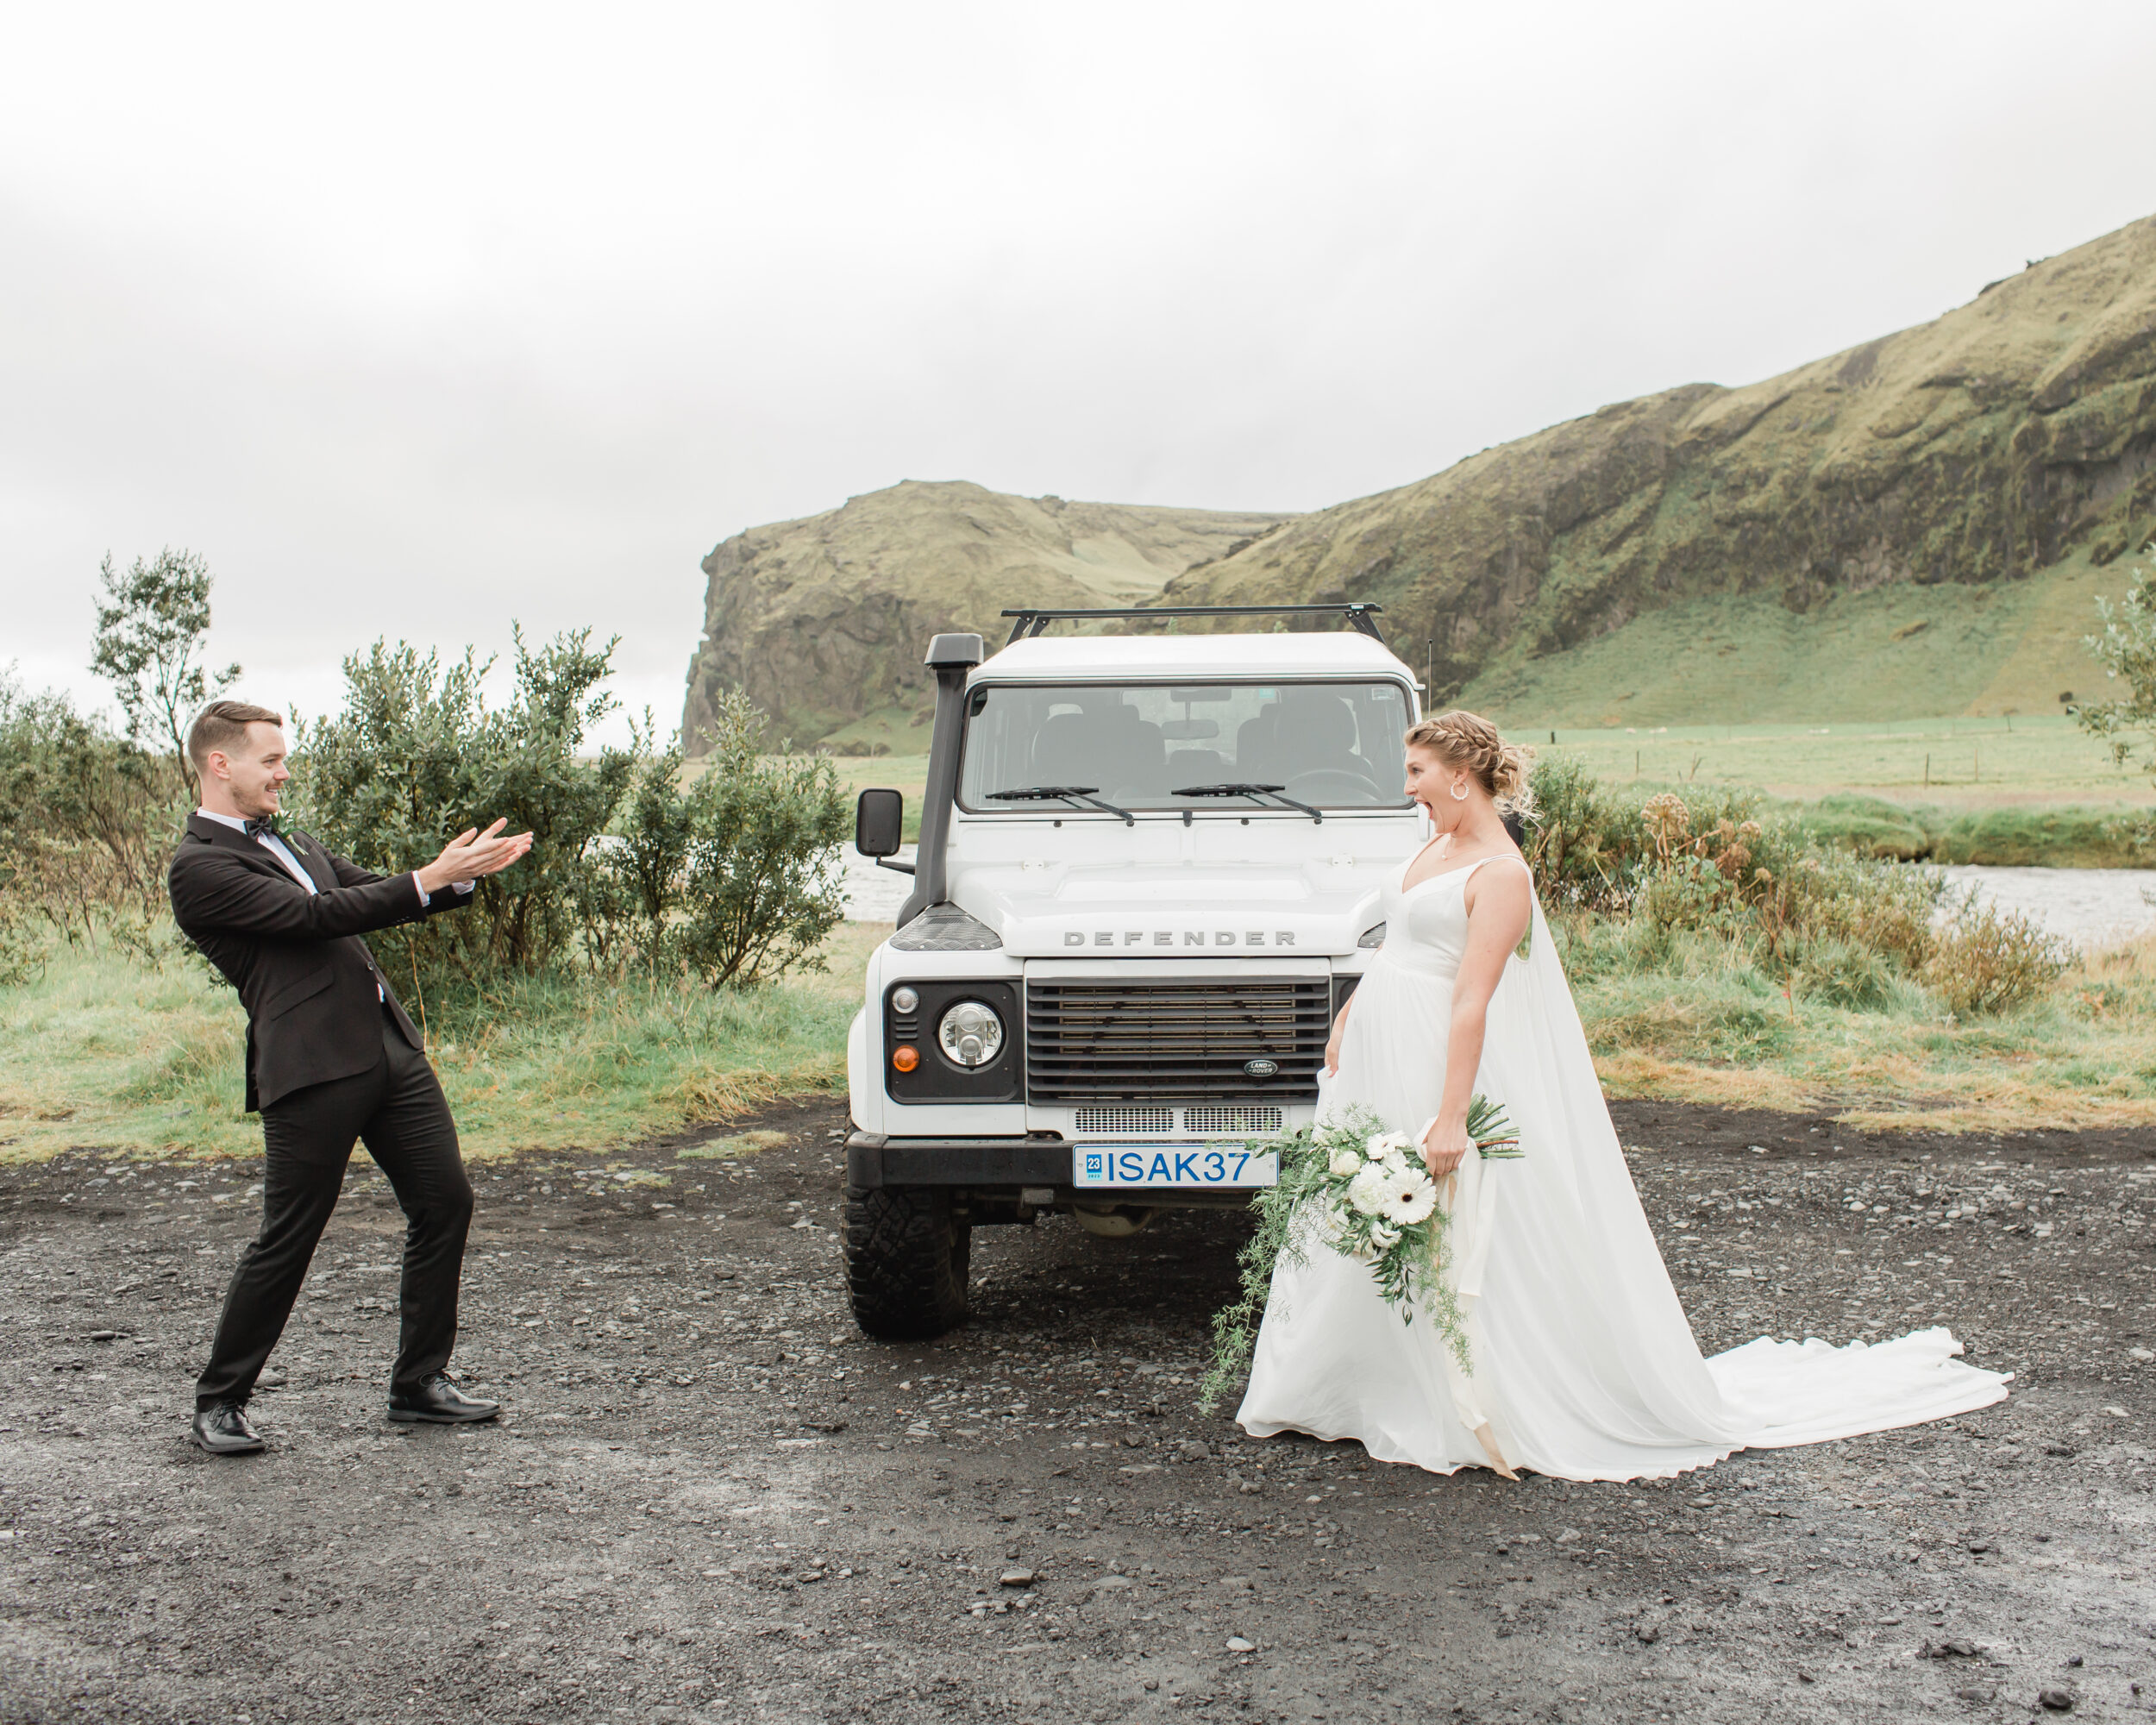 A man admires his soon to be wife near a 4x4 during their first look.